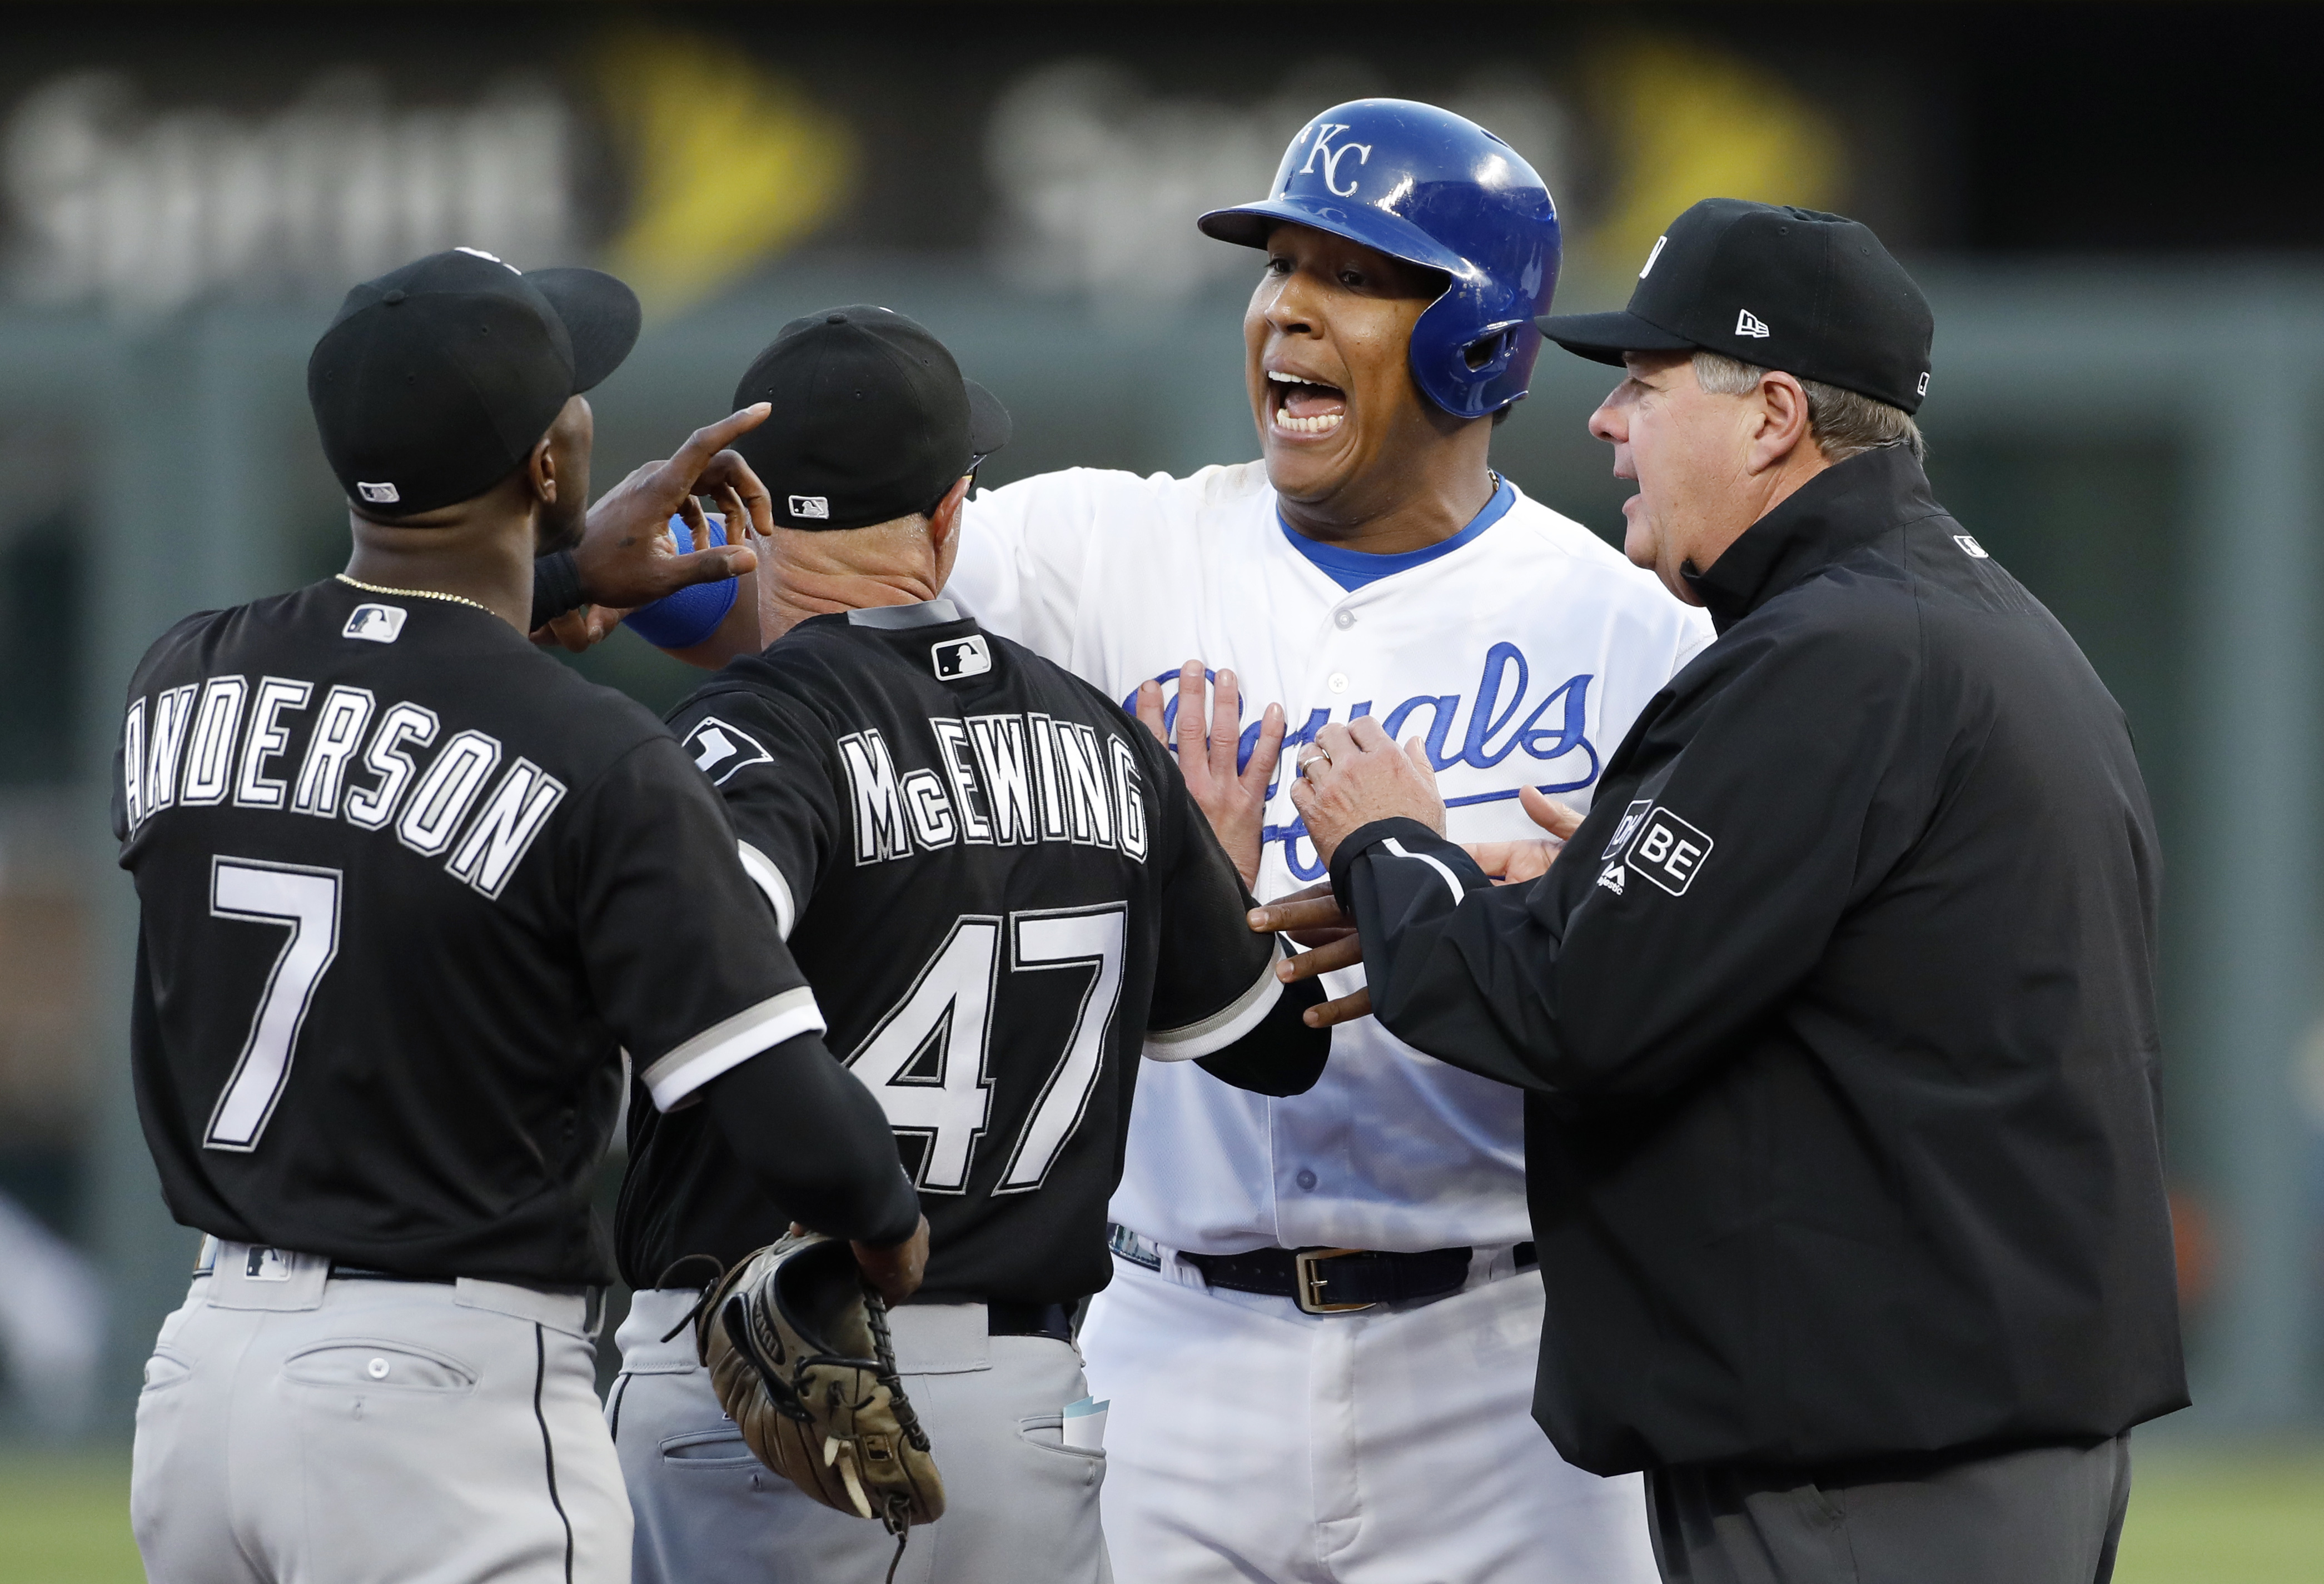 Royals end 5-game skid, beat White Sox 5-2 to split twinbill